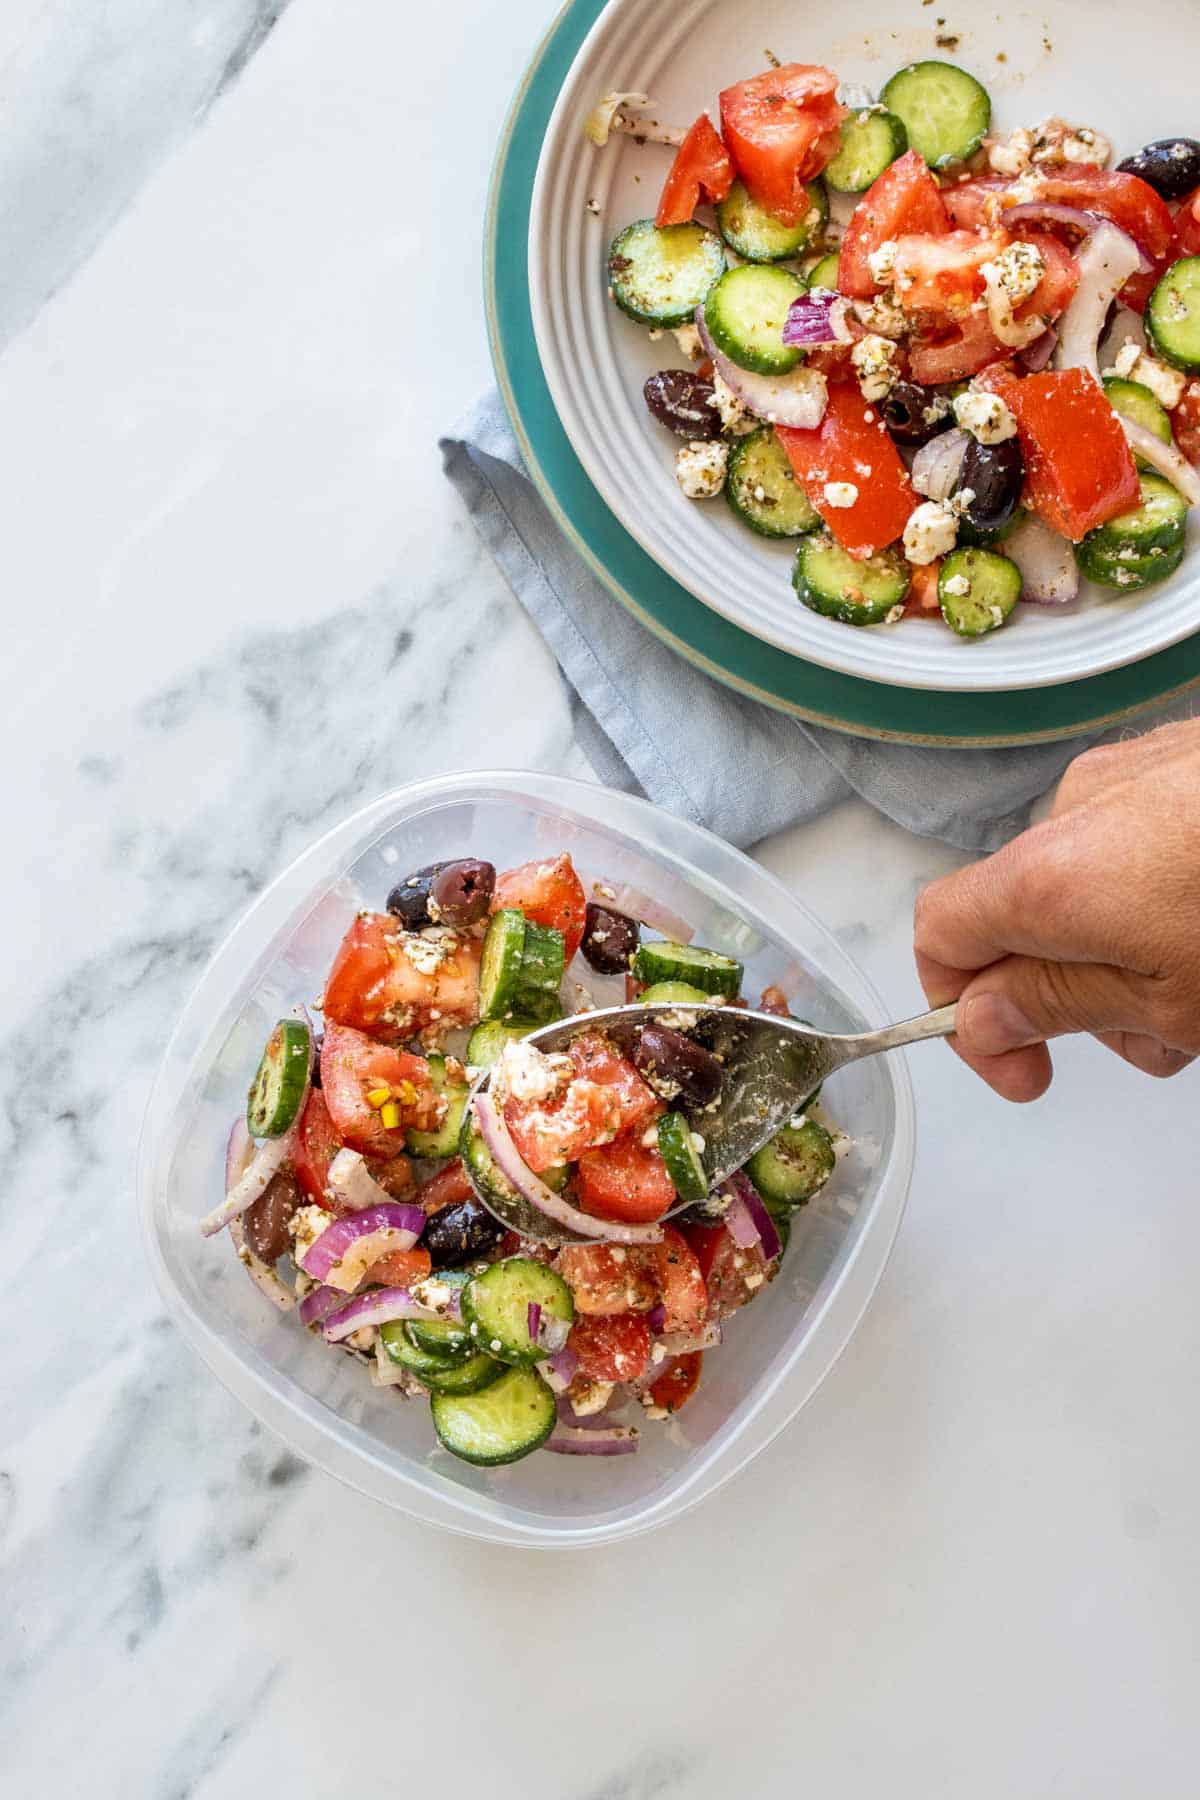 A hand scooping leftover Greek salad into a plastic container from a white bowl